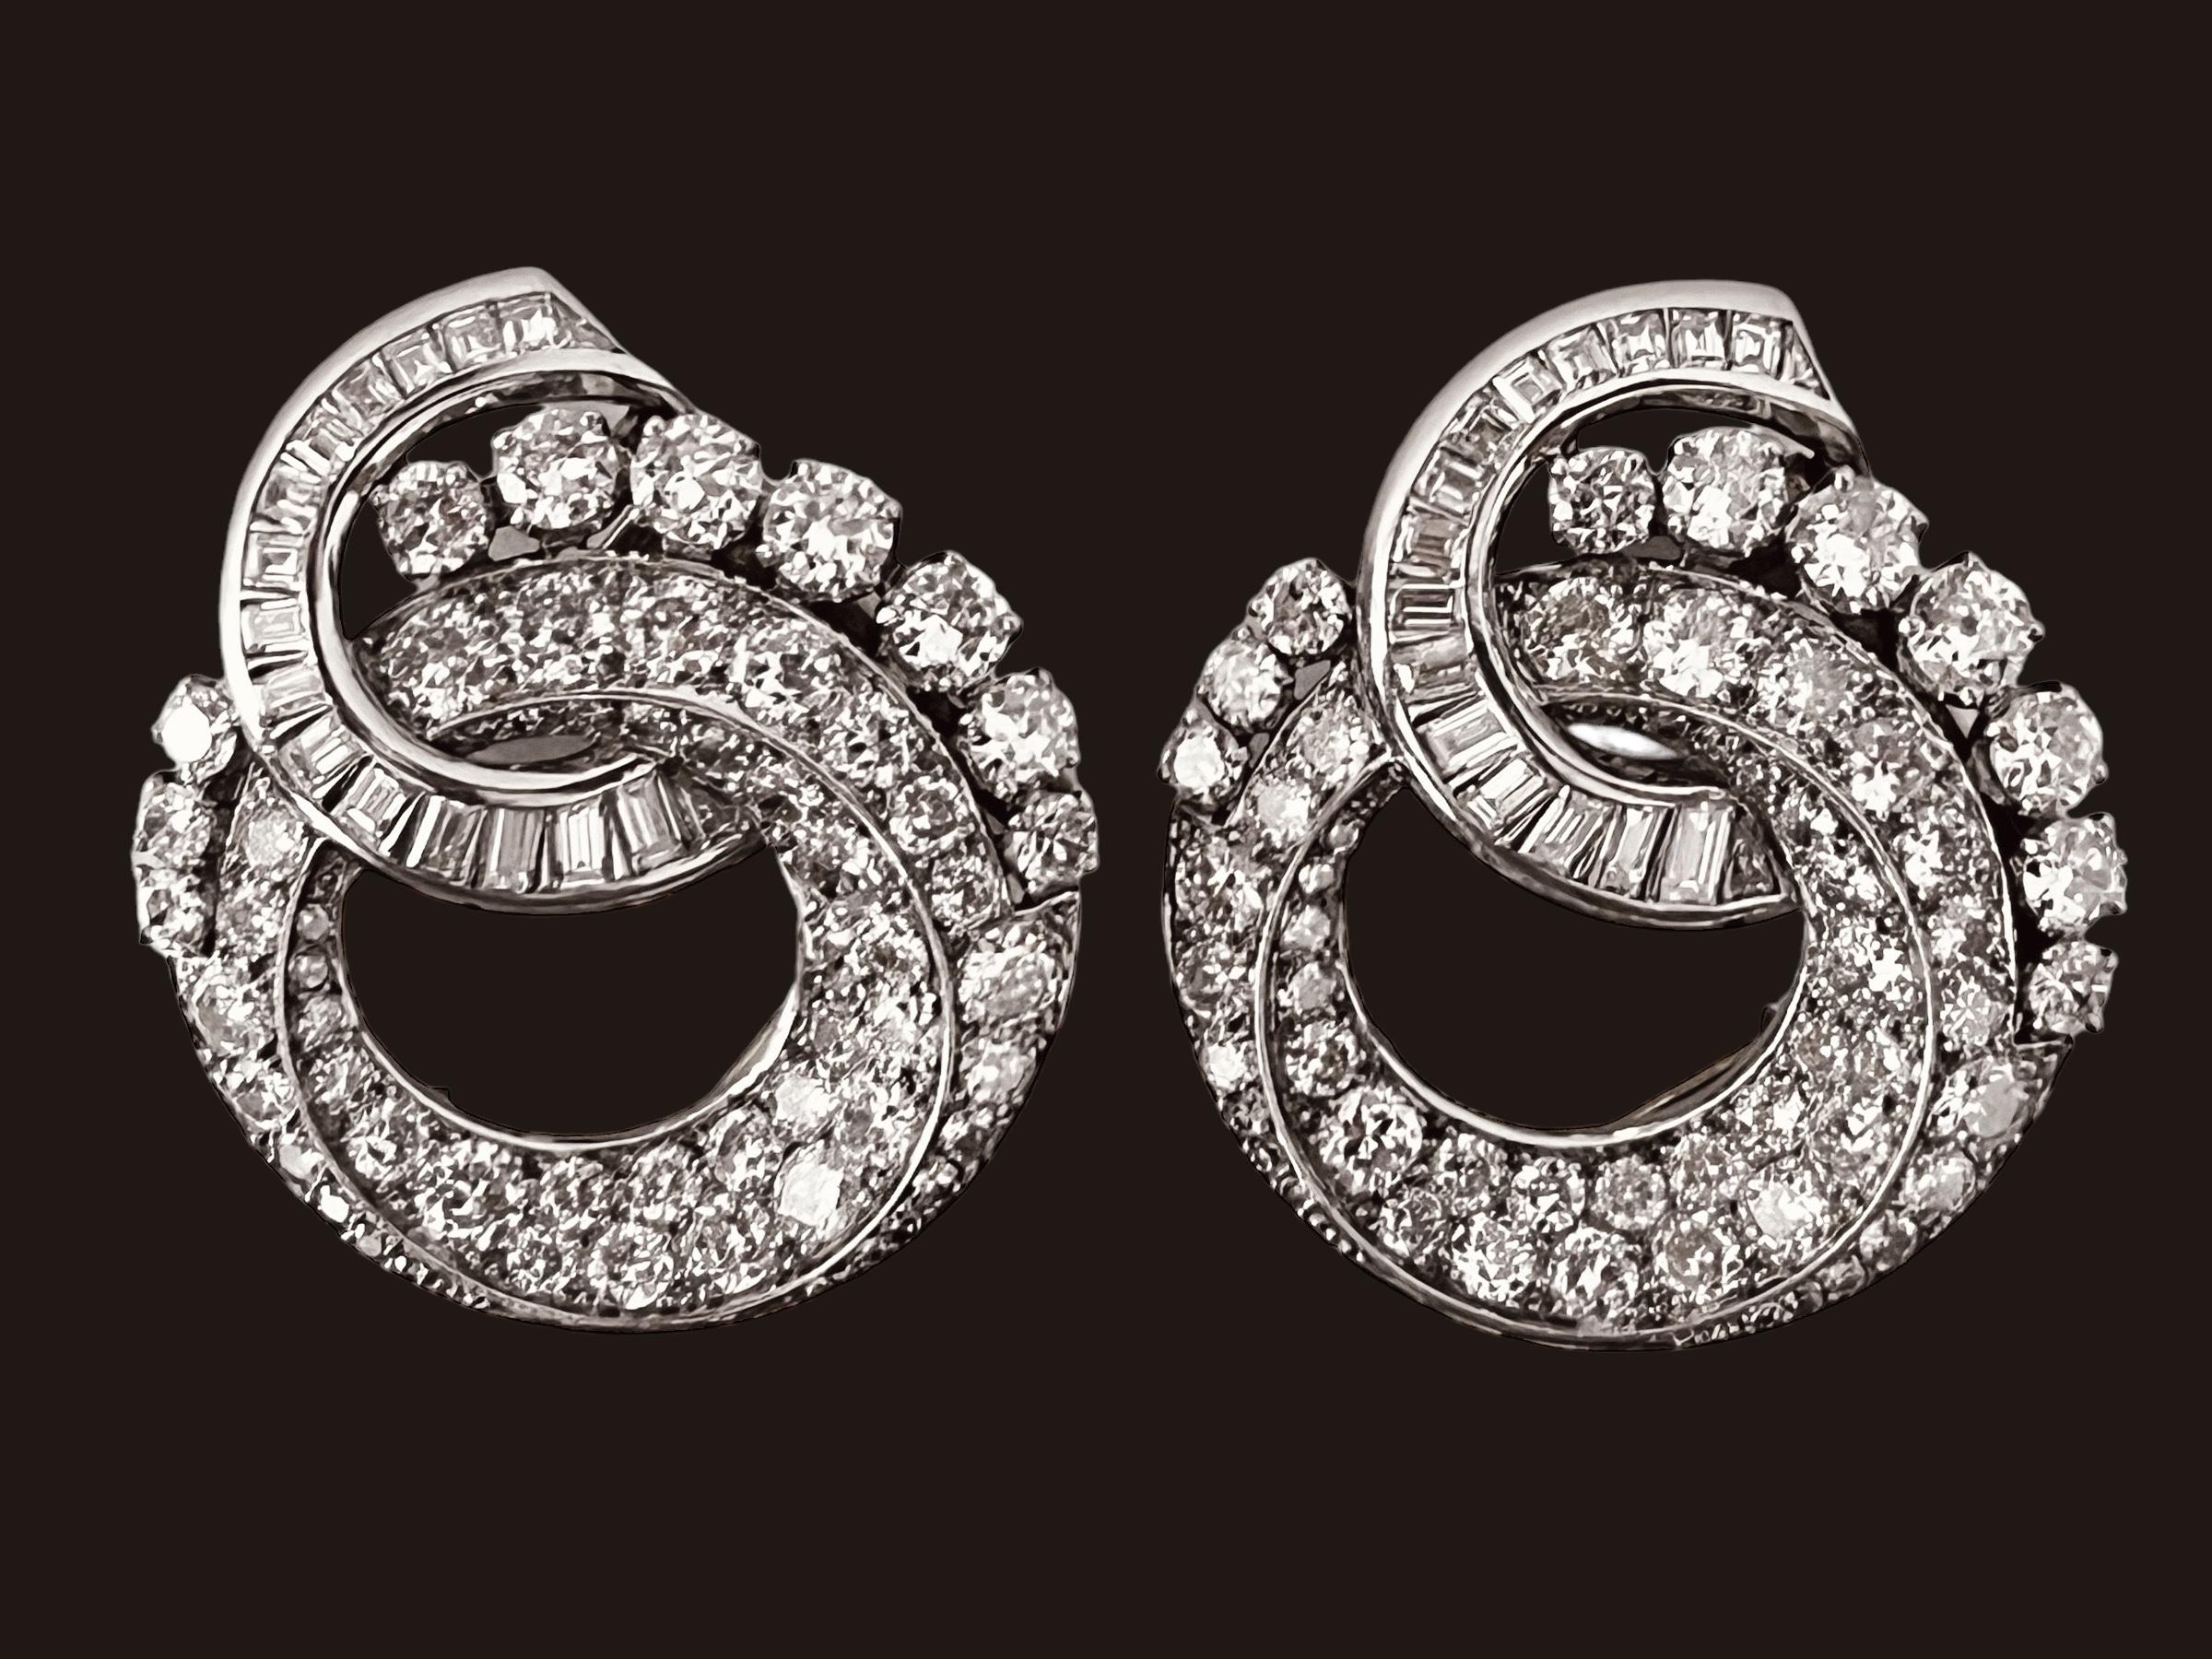 A pair of diamond clip brooches, each of swirling circular design. Claw and pave'-set with brilliant cut diamonds, accented by a channel-set baguette-cut diamond ribbon. Approximately 10cts of diamonds. Mounted in platinum. Circa 1930. One clip